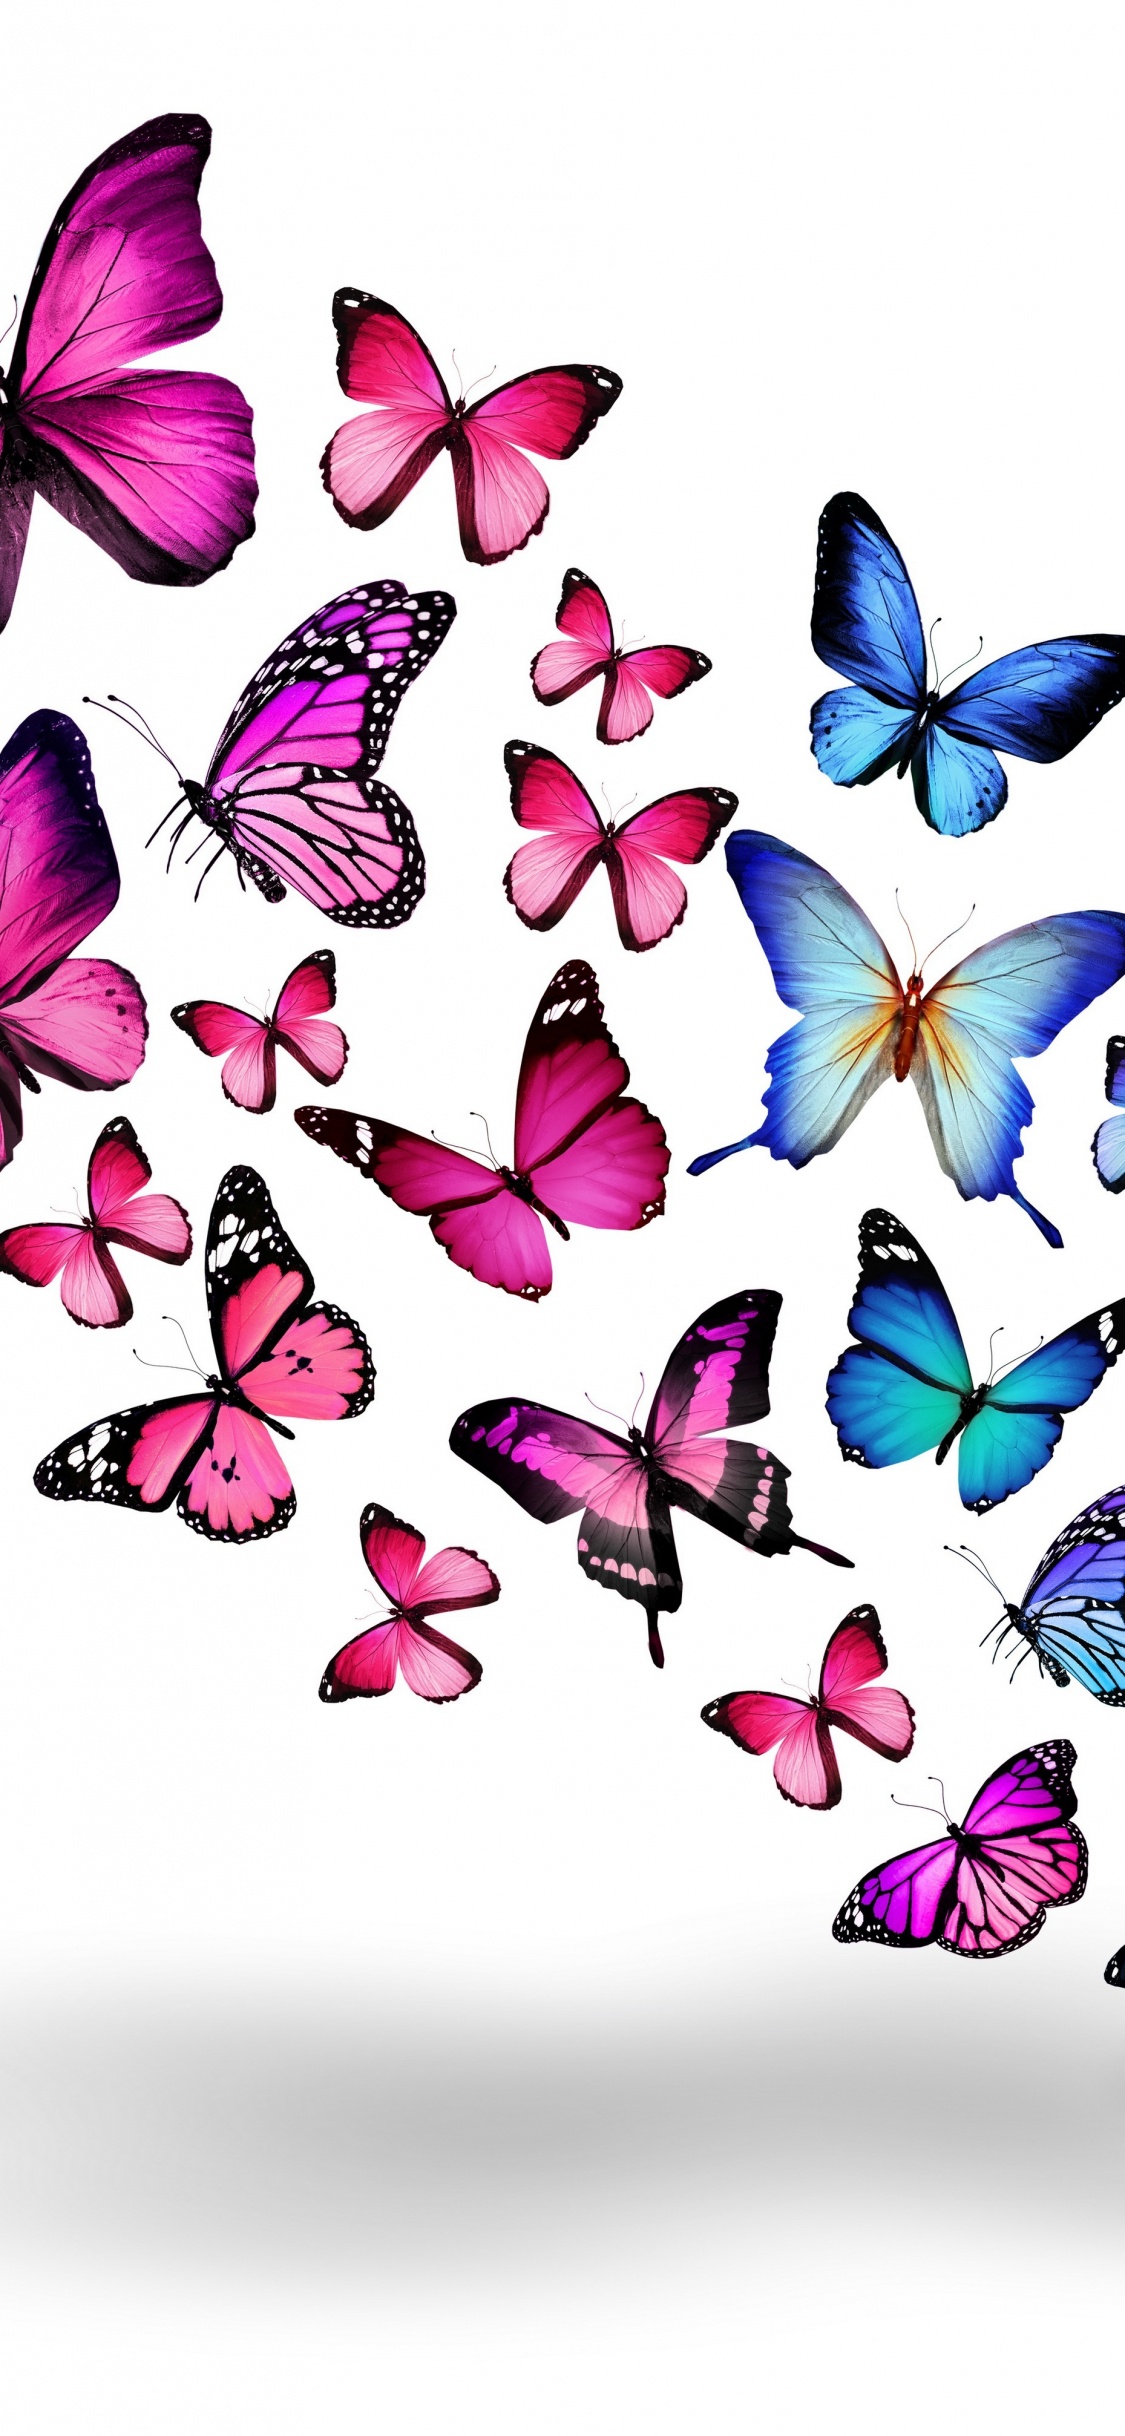 Blue and Purple Butterflies on White Background. Wallpaper in 1125x2436 Resolution